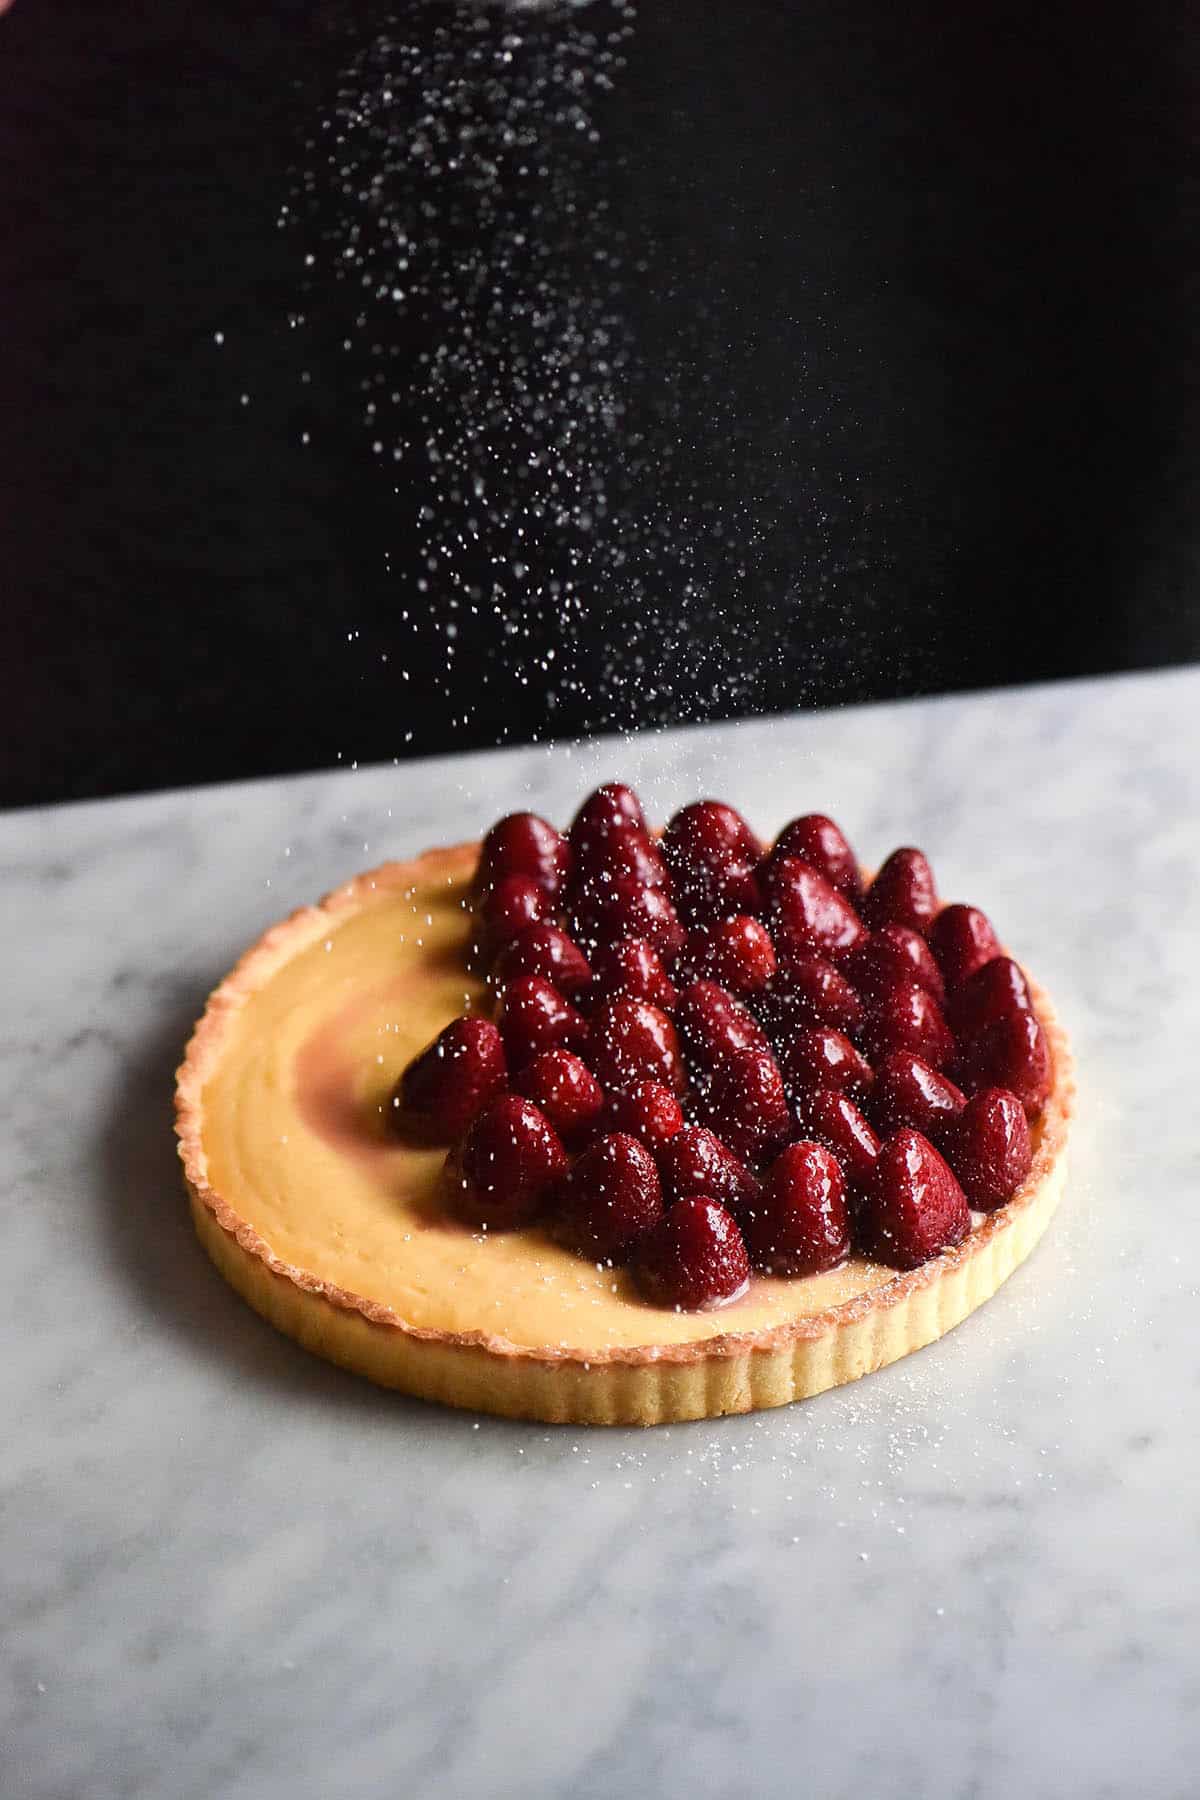 A side on view of a gluten free custard and berry tart on a white marble table against a black backdrop. The tart is topped with small upright strawberries and is being sprinkled with a dusting of icing sugar.